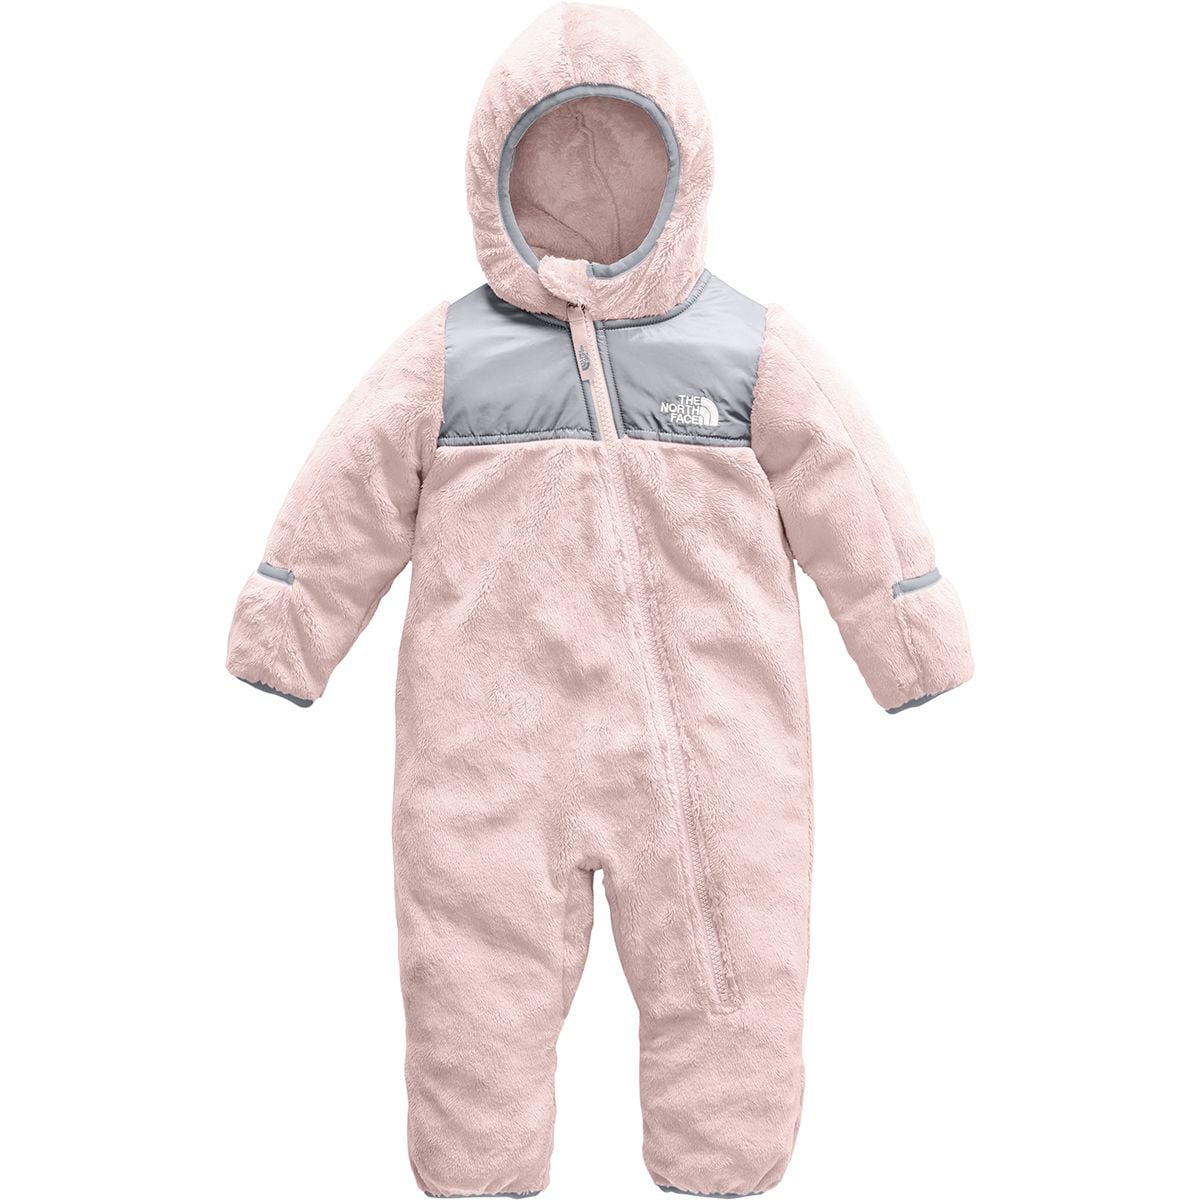 north face infant oso one piece